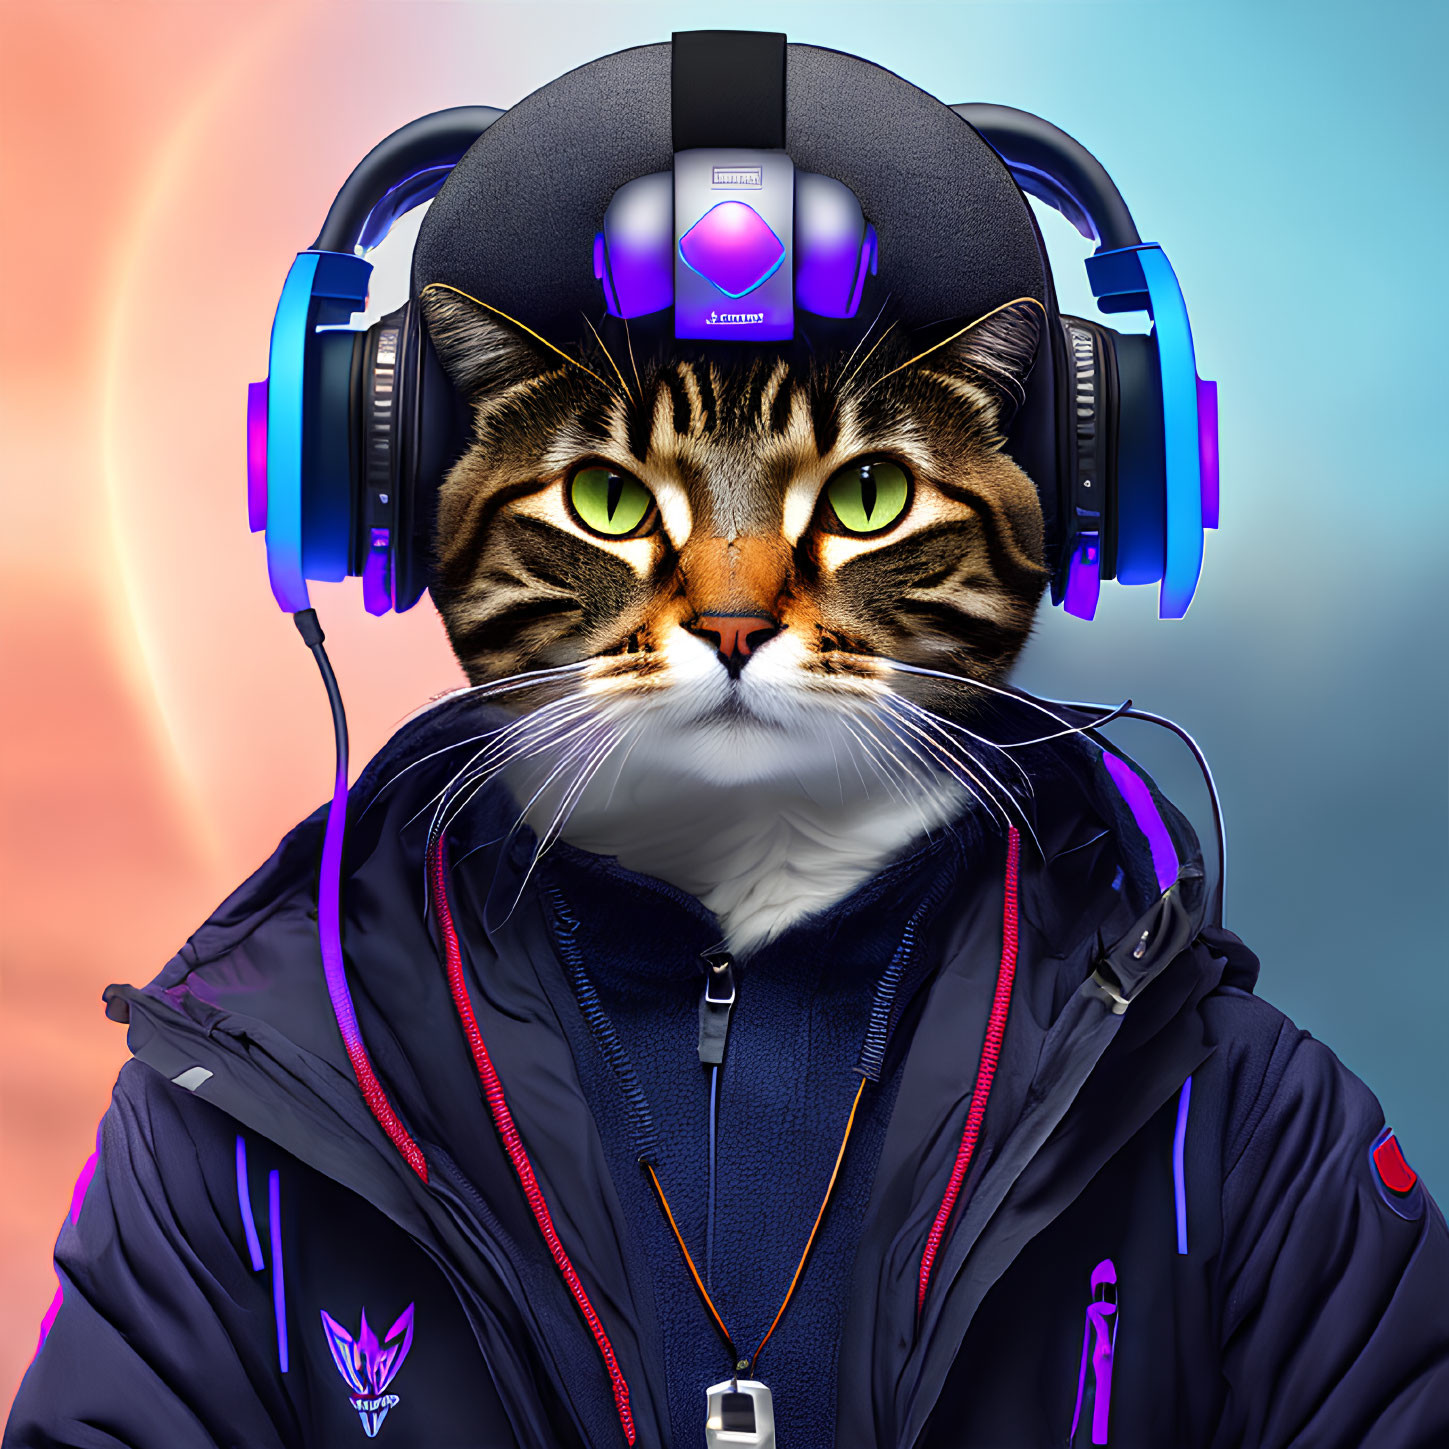 Cat with human body wearing headphones and jacket on colorful background